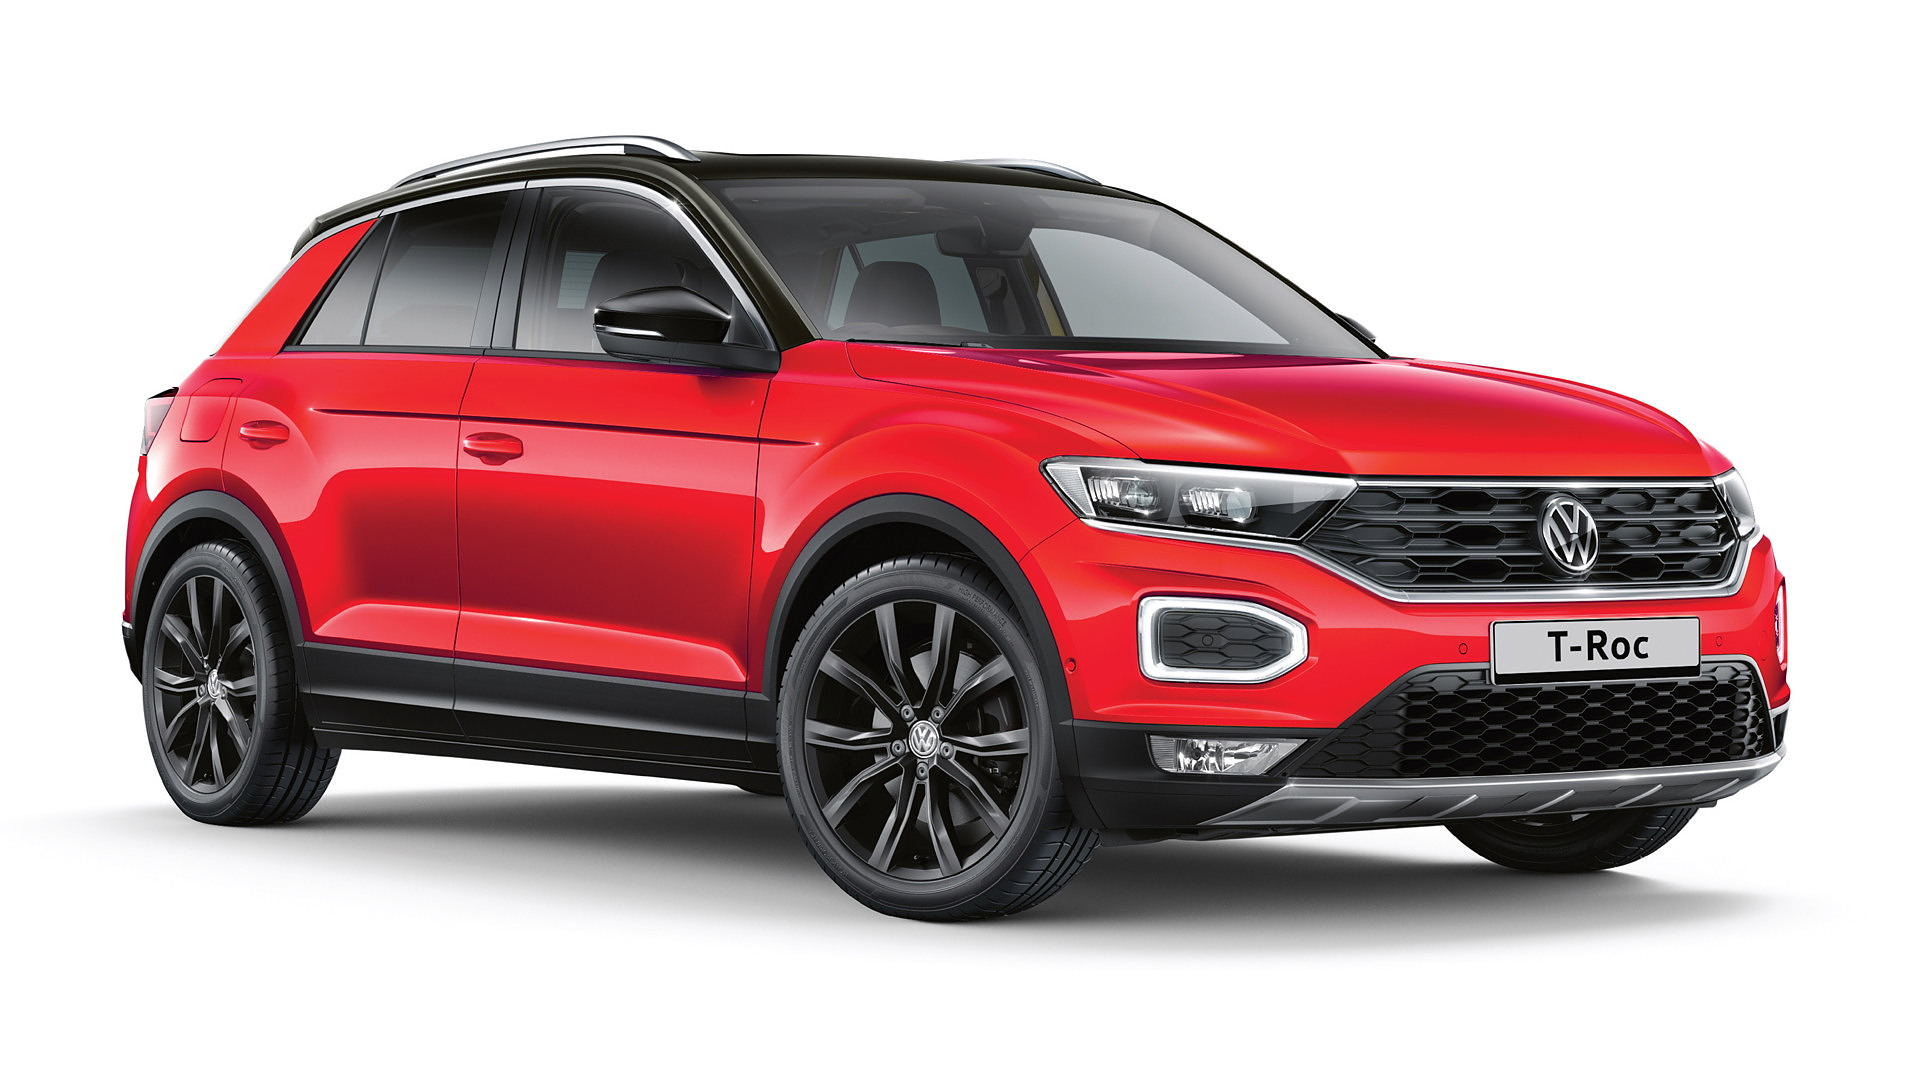 inference cavity Driving force Volkswagen T-Roc Images - Interior & Exterior Photo Gallery [100+ Images] -  CarWale